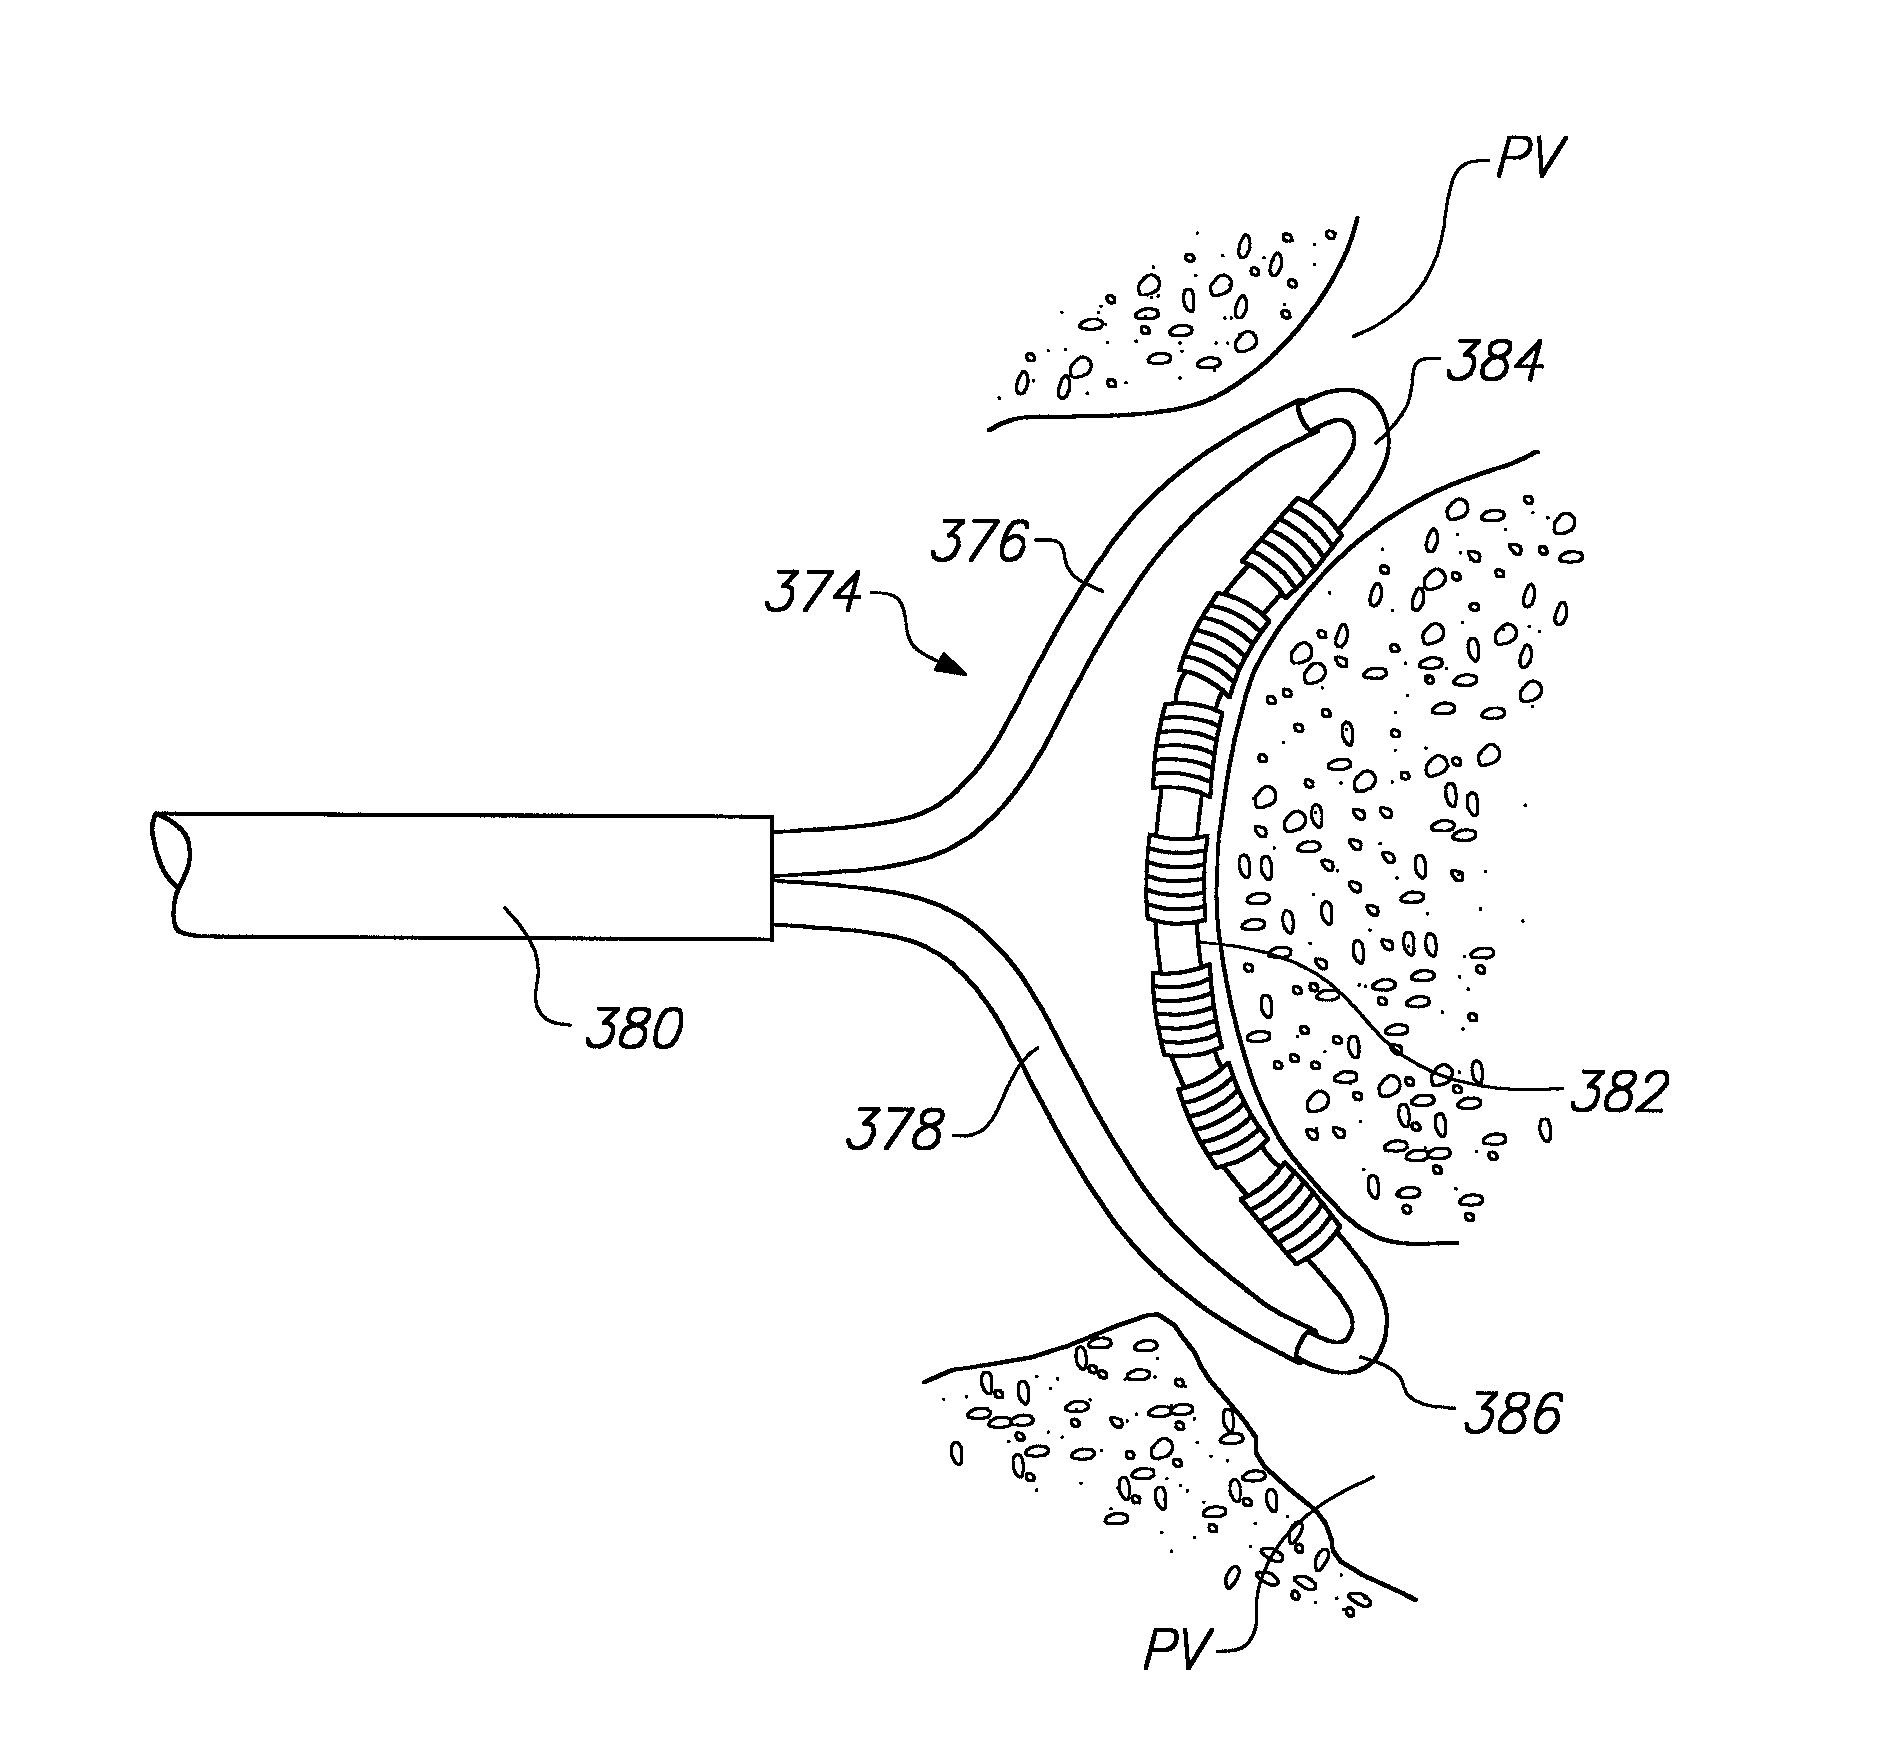 Structures for supporting multiple electrode elements